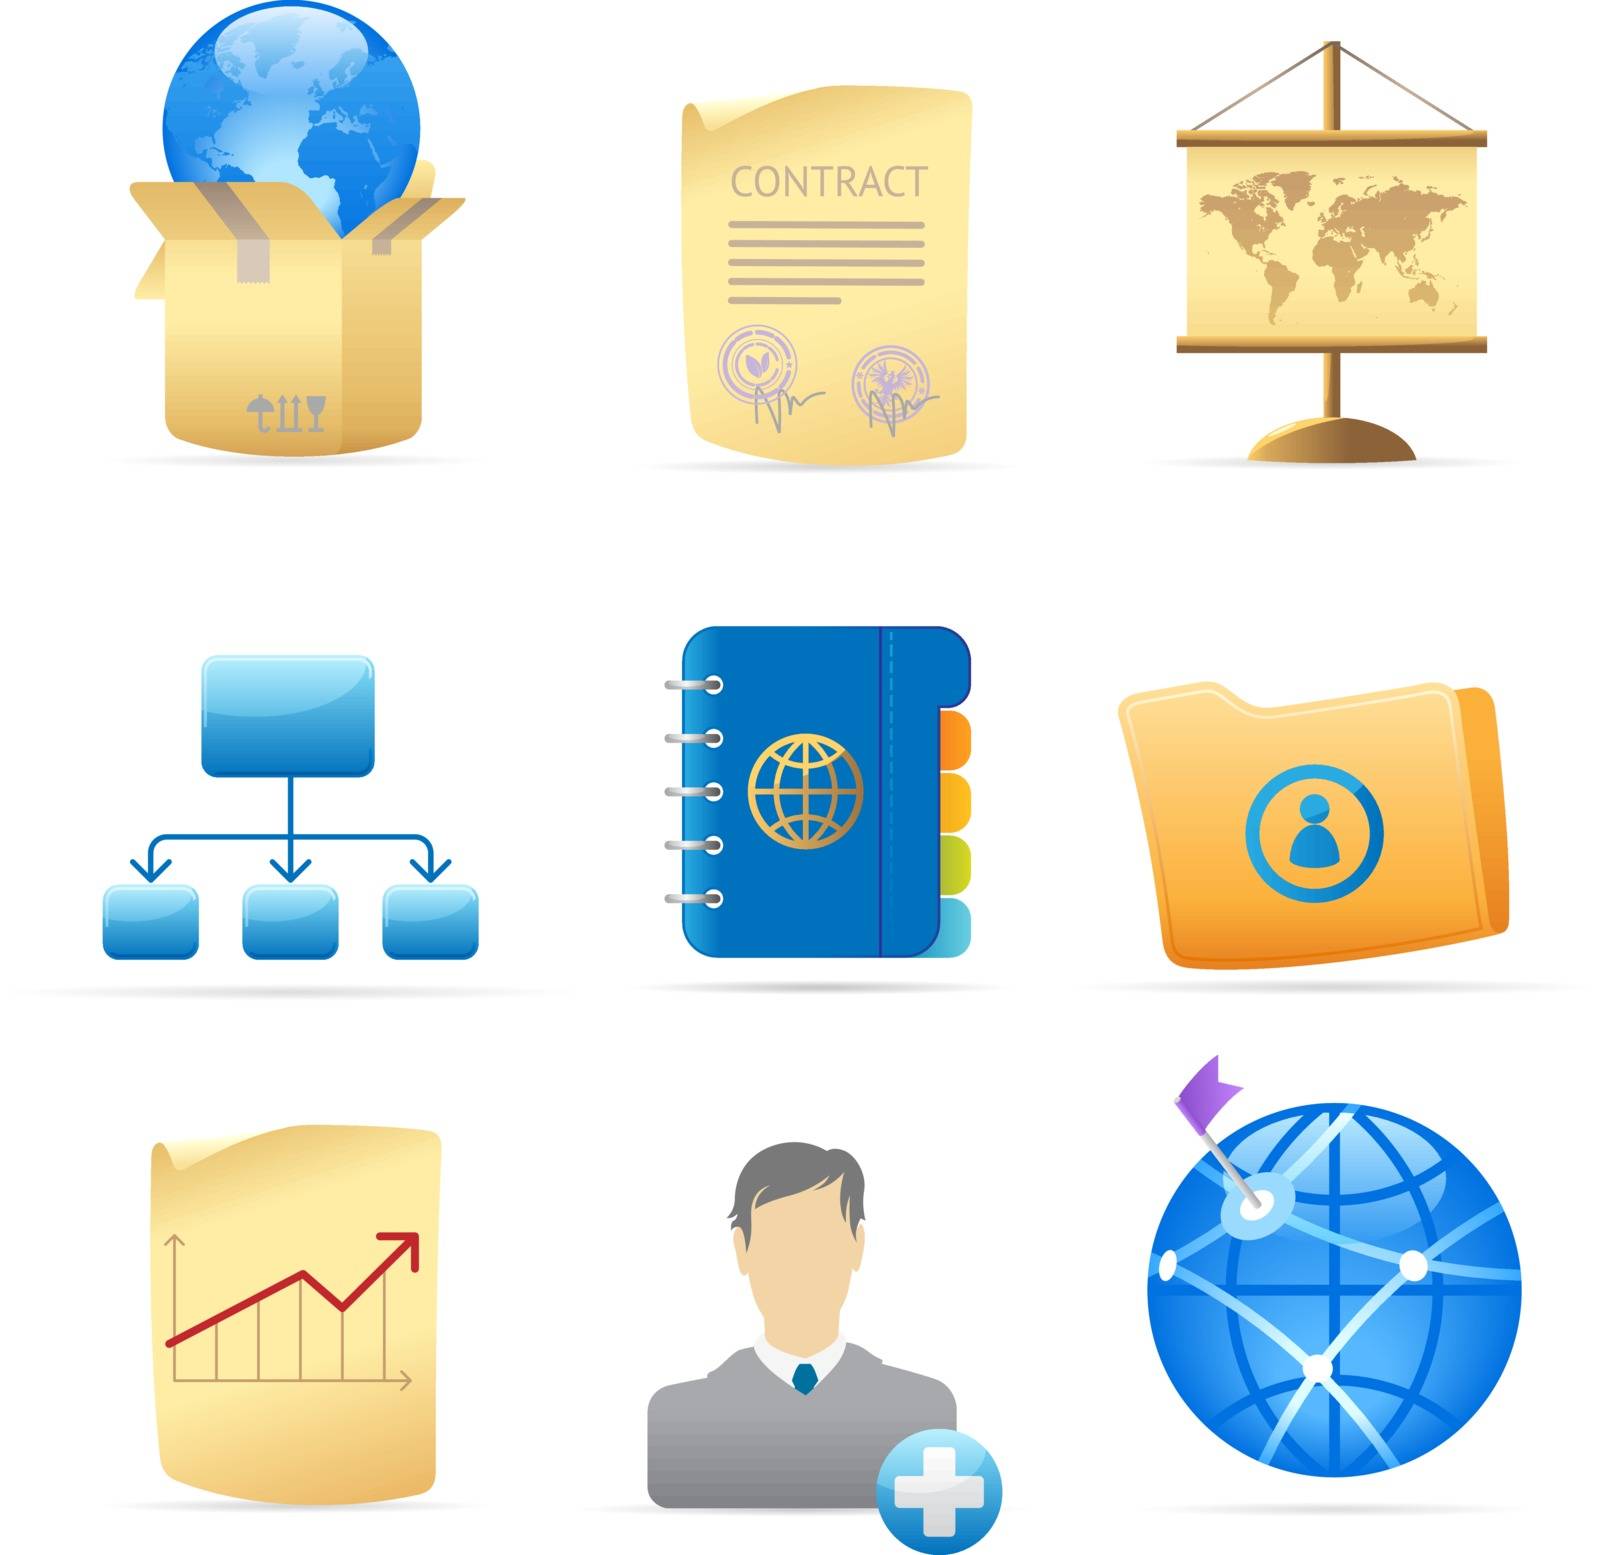 Icons for business metaphors and symbols. Vector illustration.